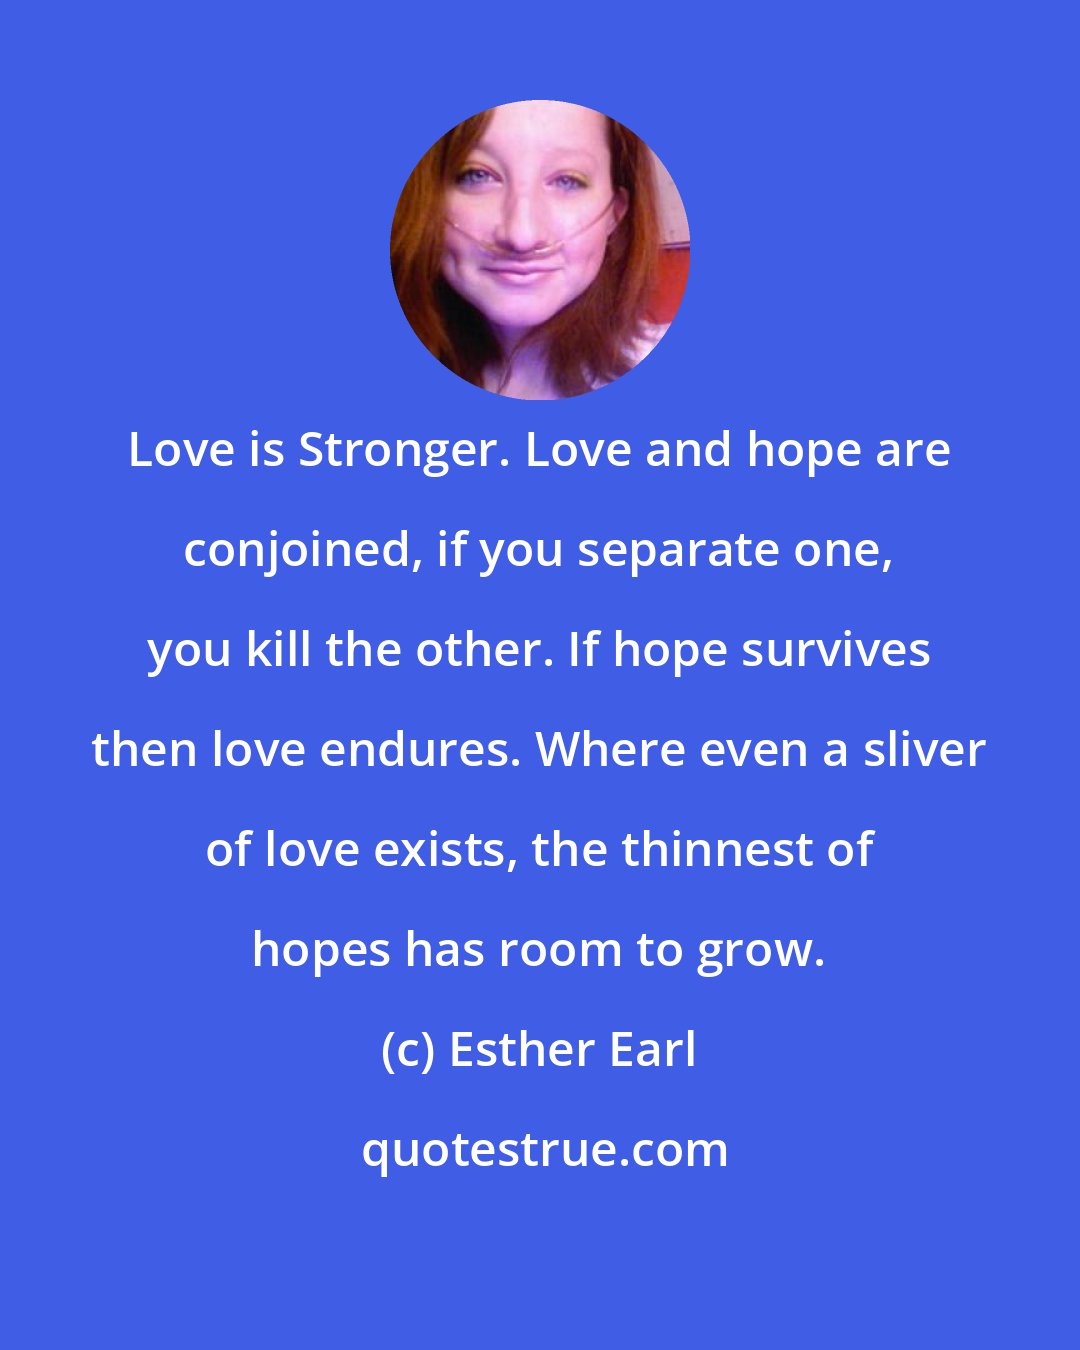 Esther Earl: Love is Stronger. Love and hope are conjoined, if you separate one, you kill the other. If hope survives then love endures. Where even a sliver of love exists, the thinnest of hopes has room to grow.